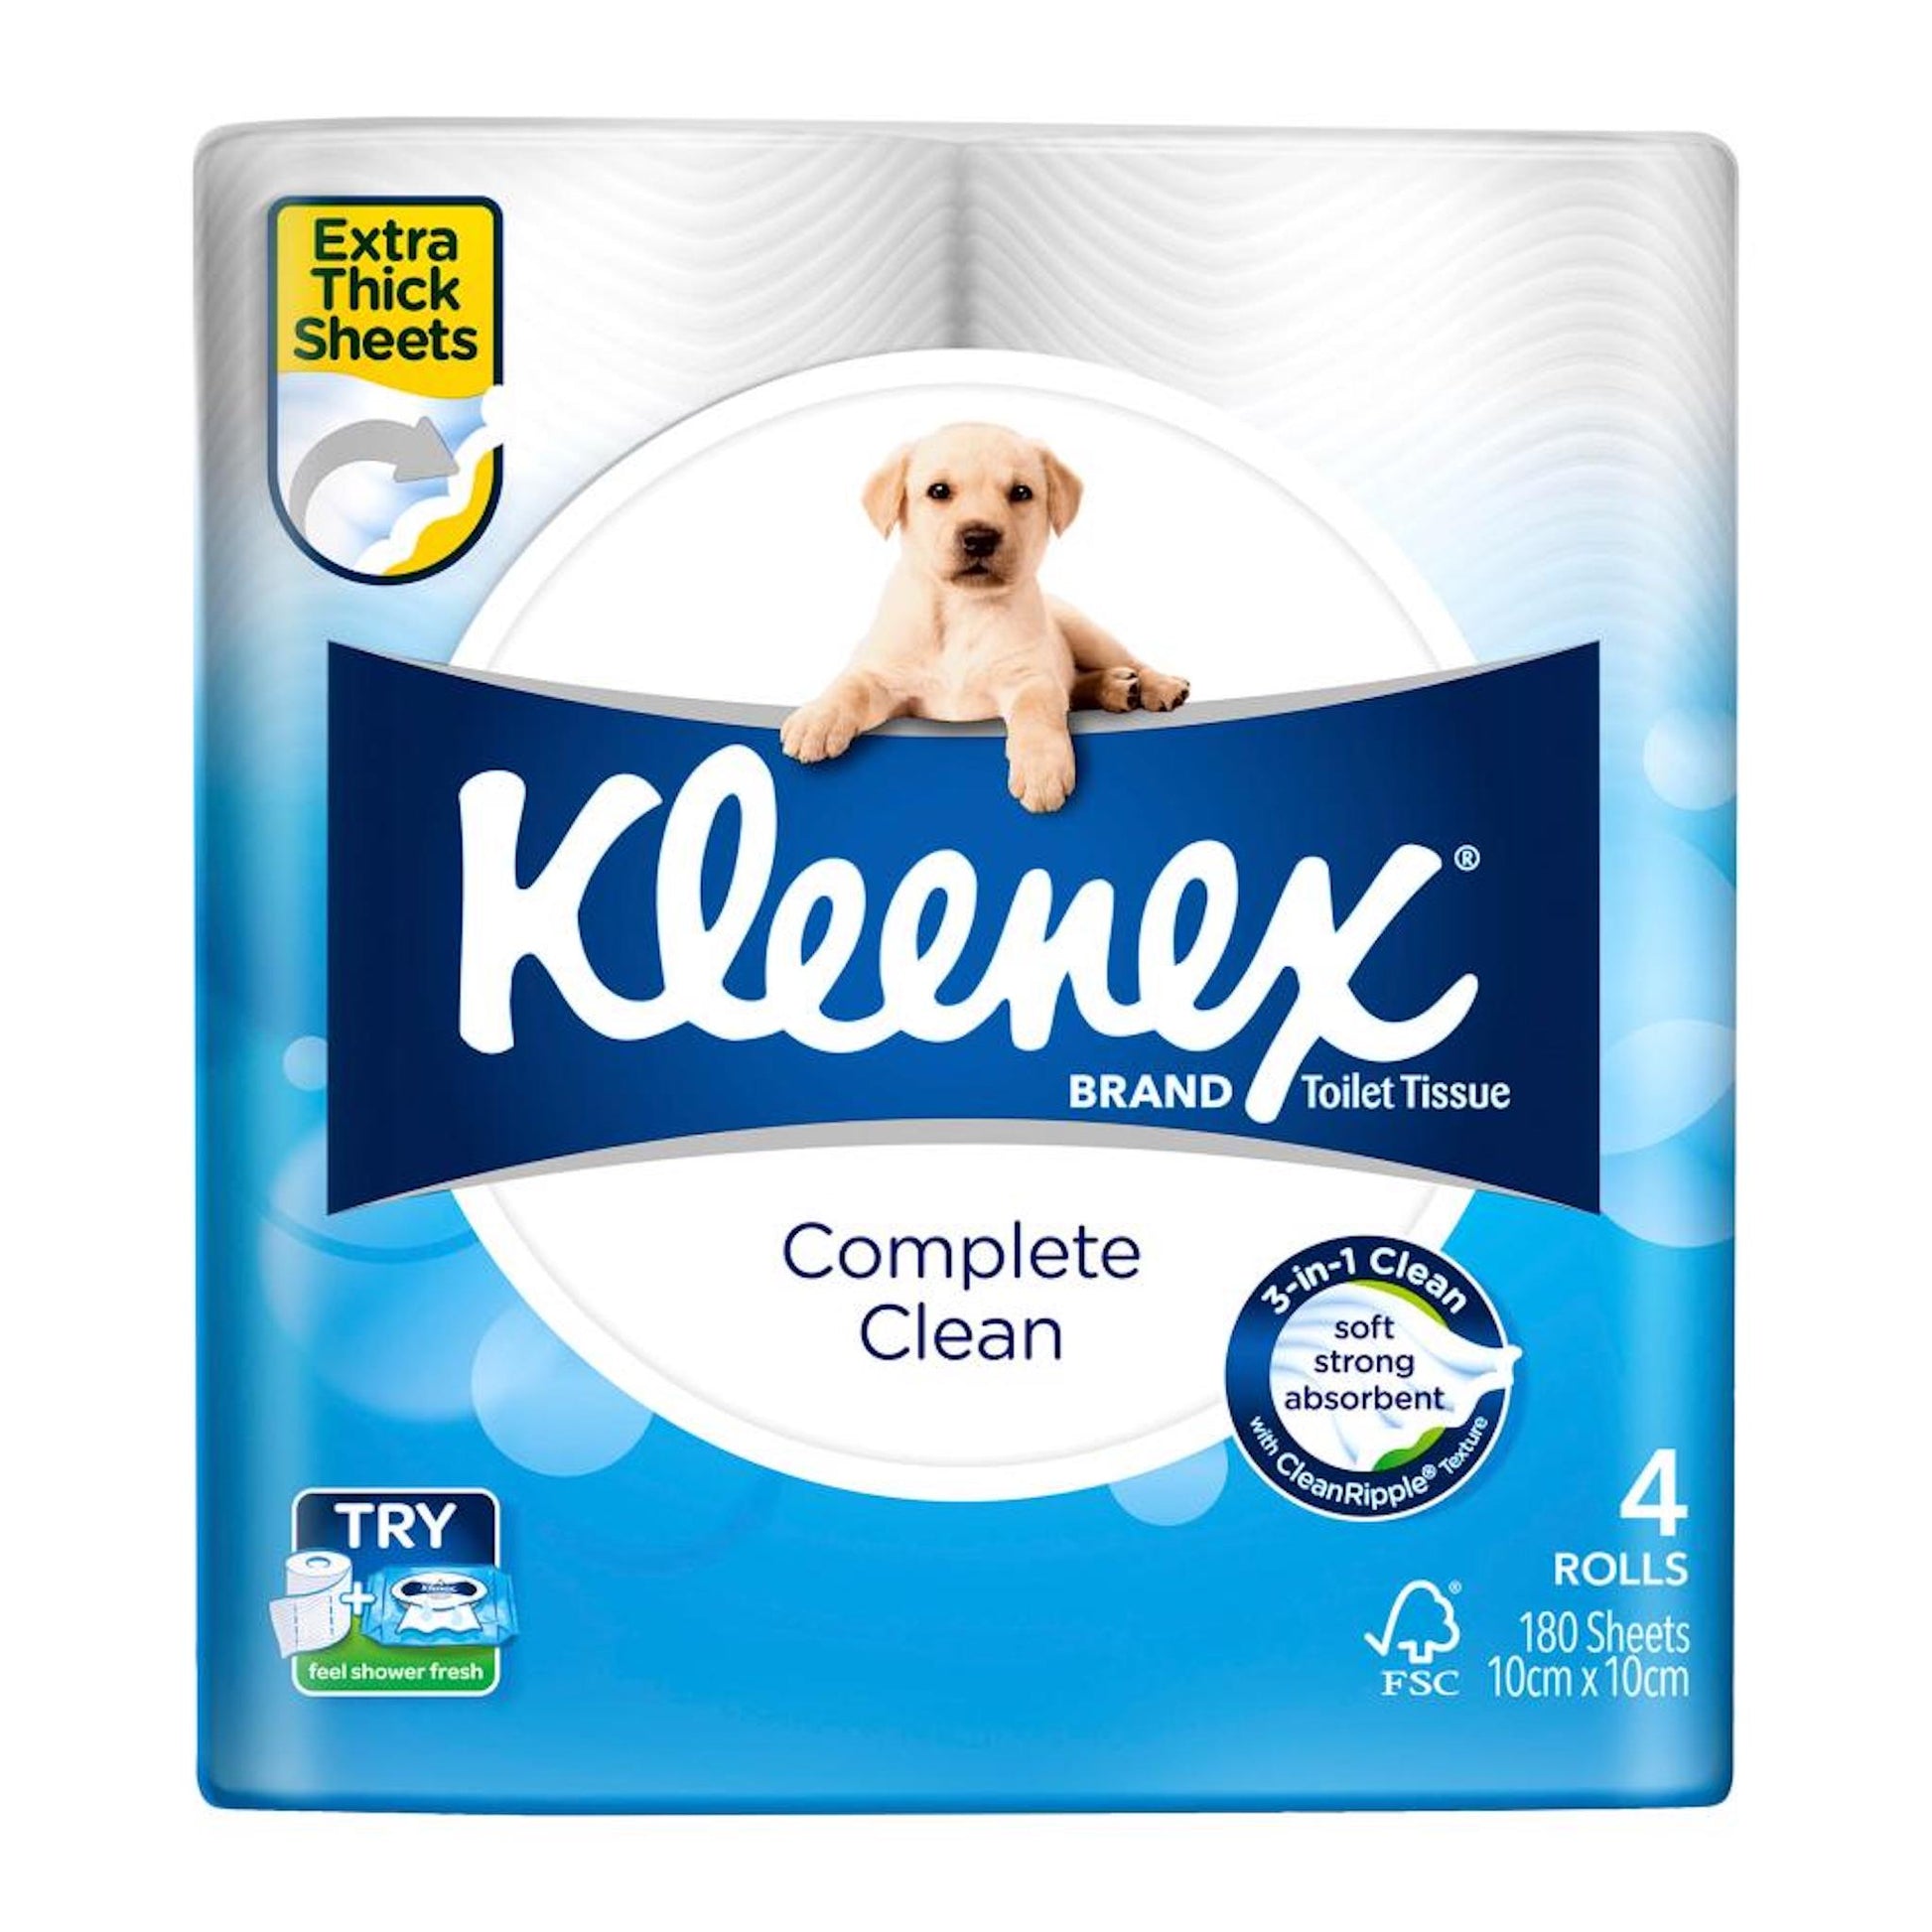 Kleenex 98130 Complete Clean Toilet Tissue 1 Ply 180 Sheets Pack 4